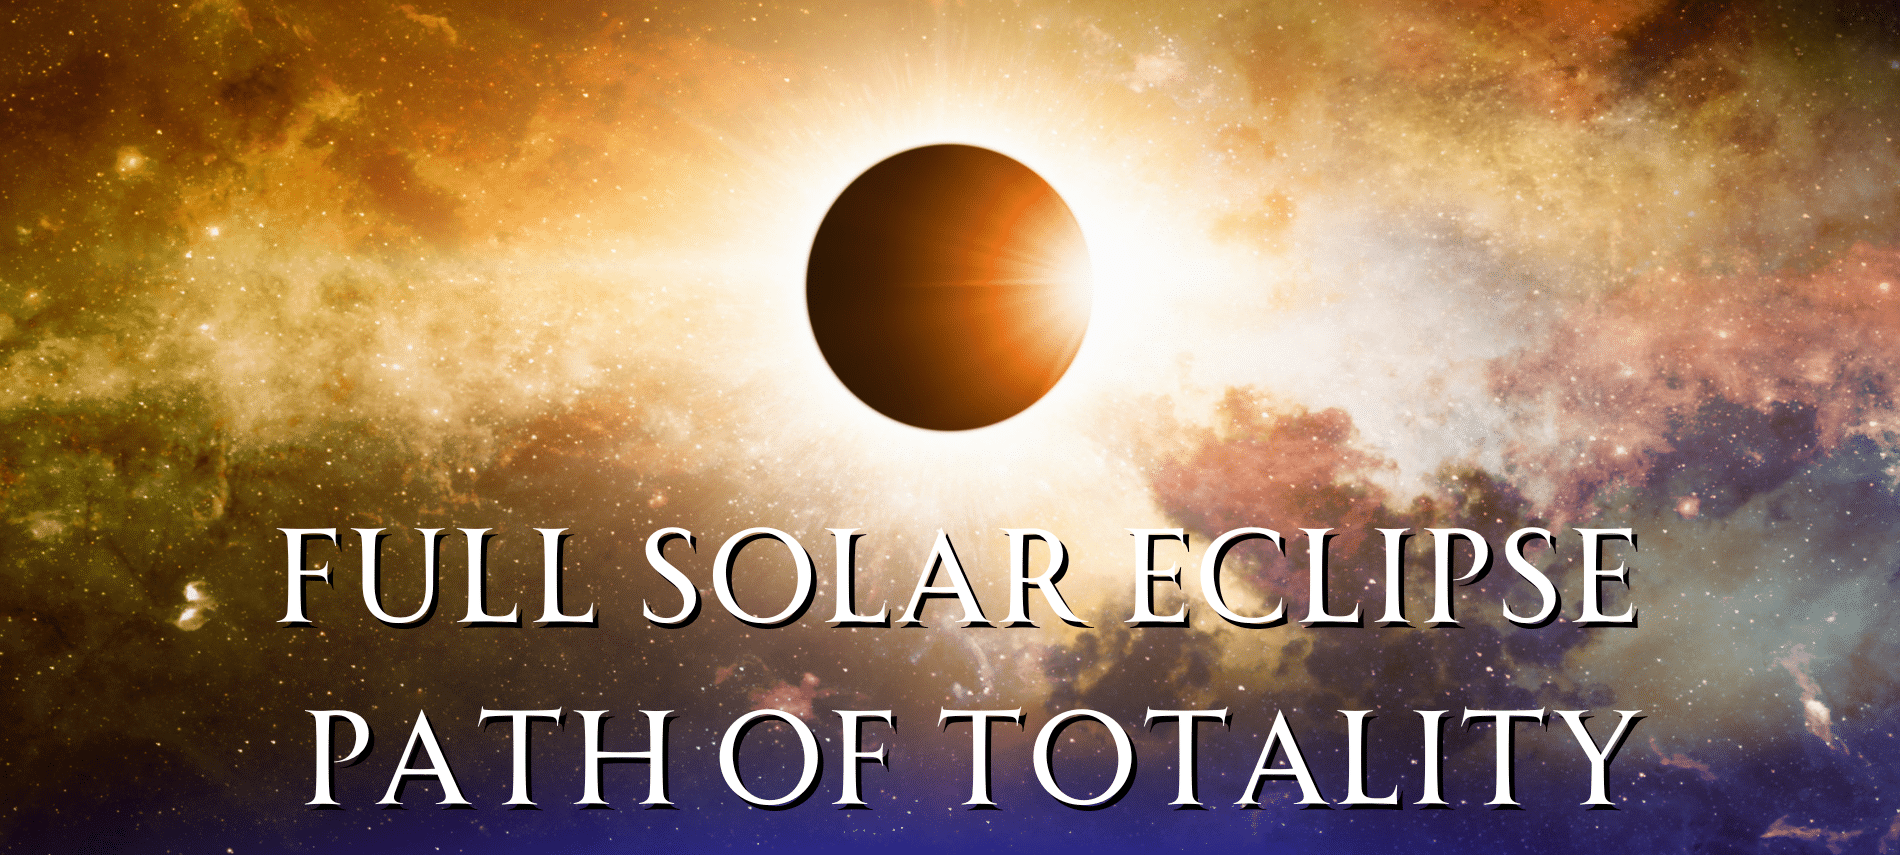 A total eclipse of the sun in outer space with text saying "Full Solar Eclipse Path of Totality"